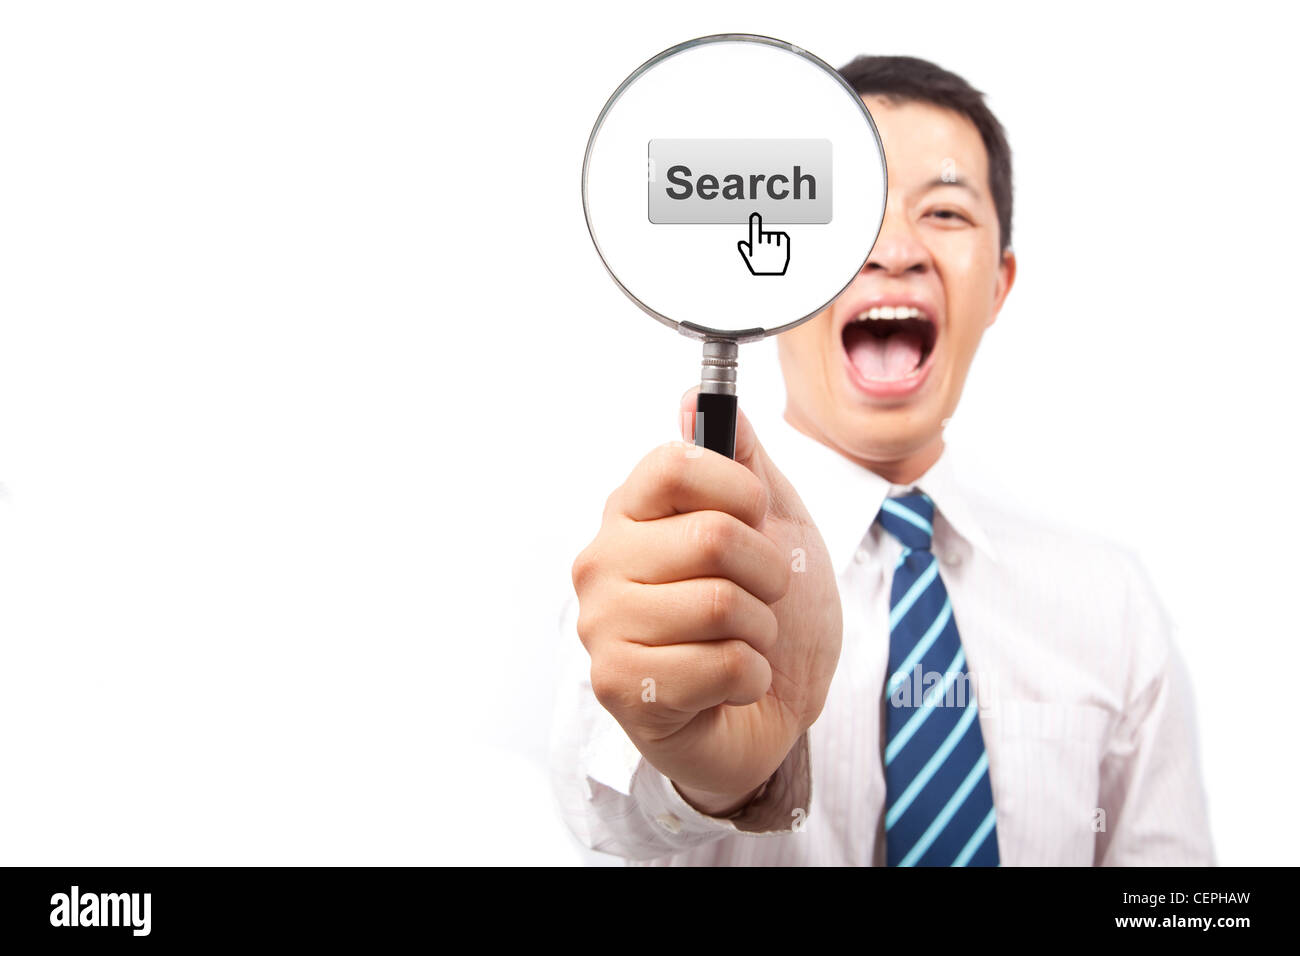 happy young business man holding Magnifier and internet search engine concept Stock Photo